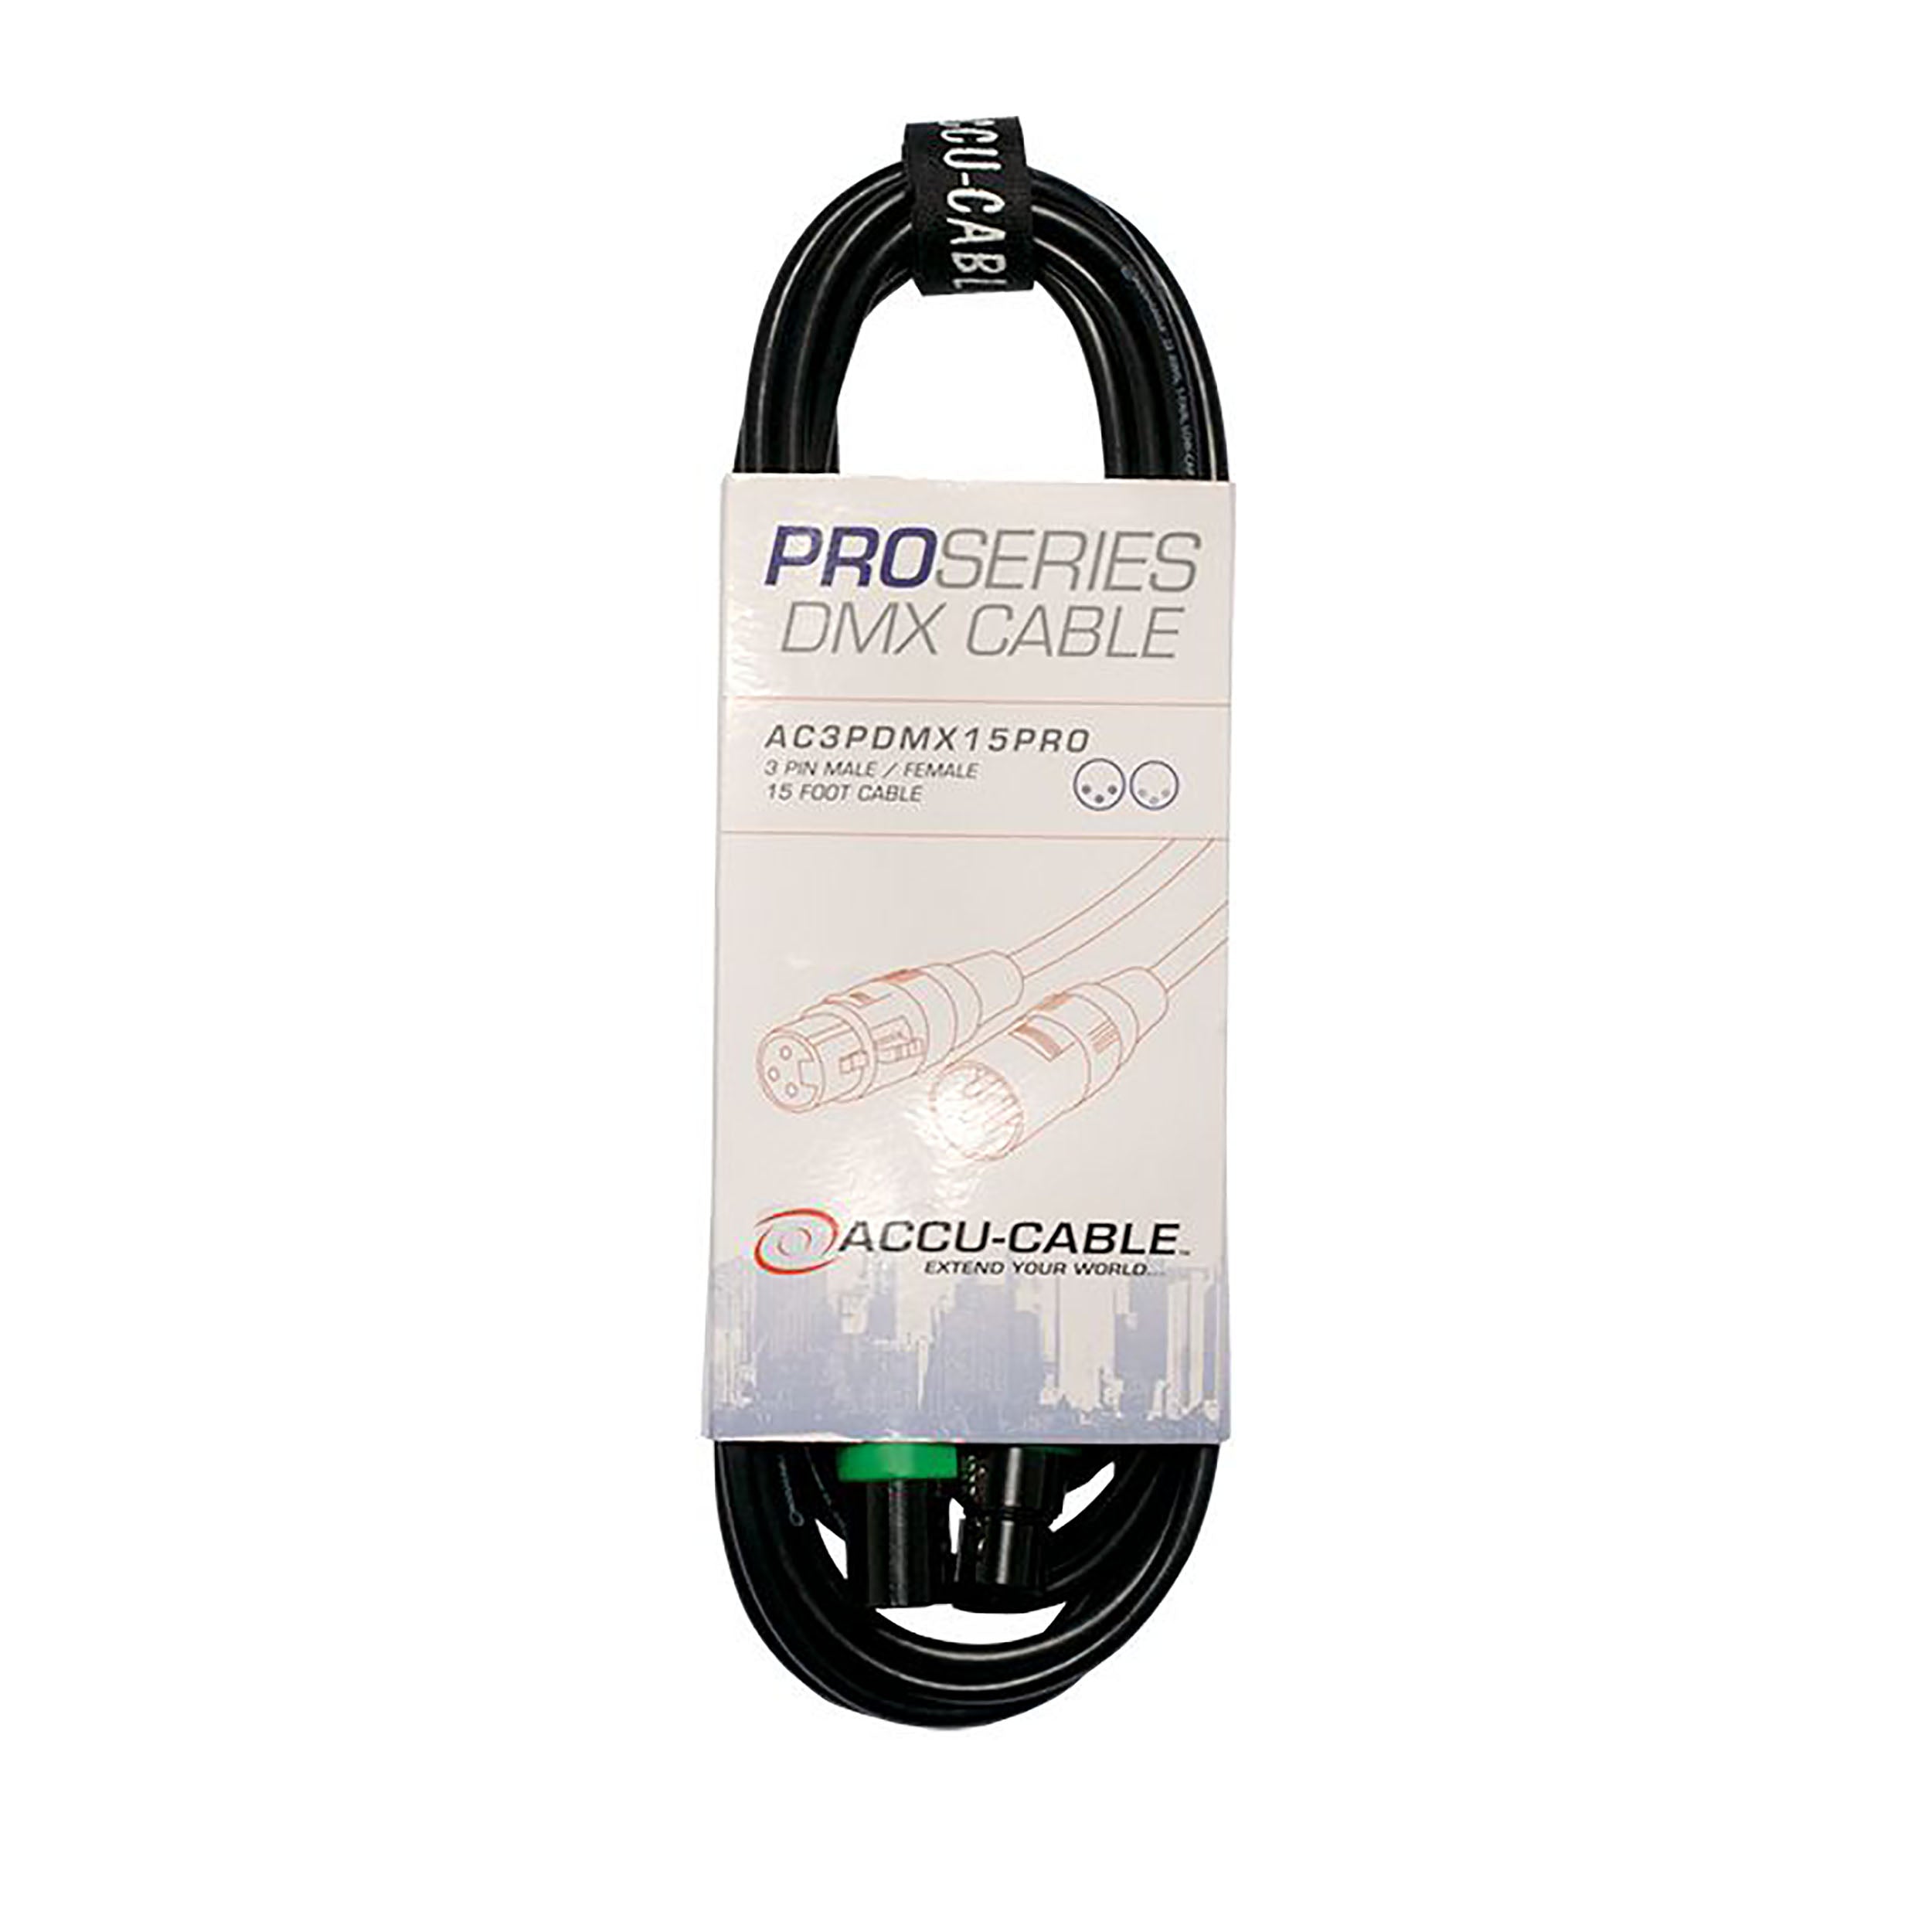 Accu Cable AC3PDMX15PRO, 3-Pin Pro Series DMX Cable - 15 Foot by Accu Cable